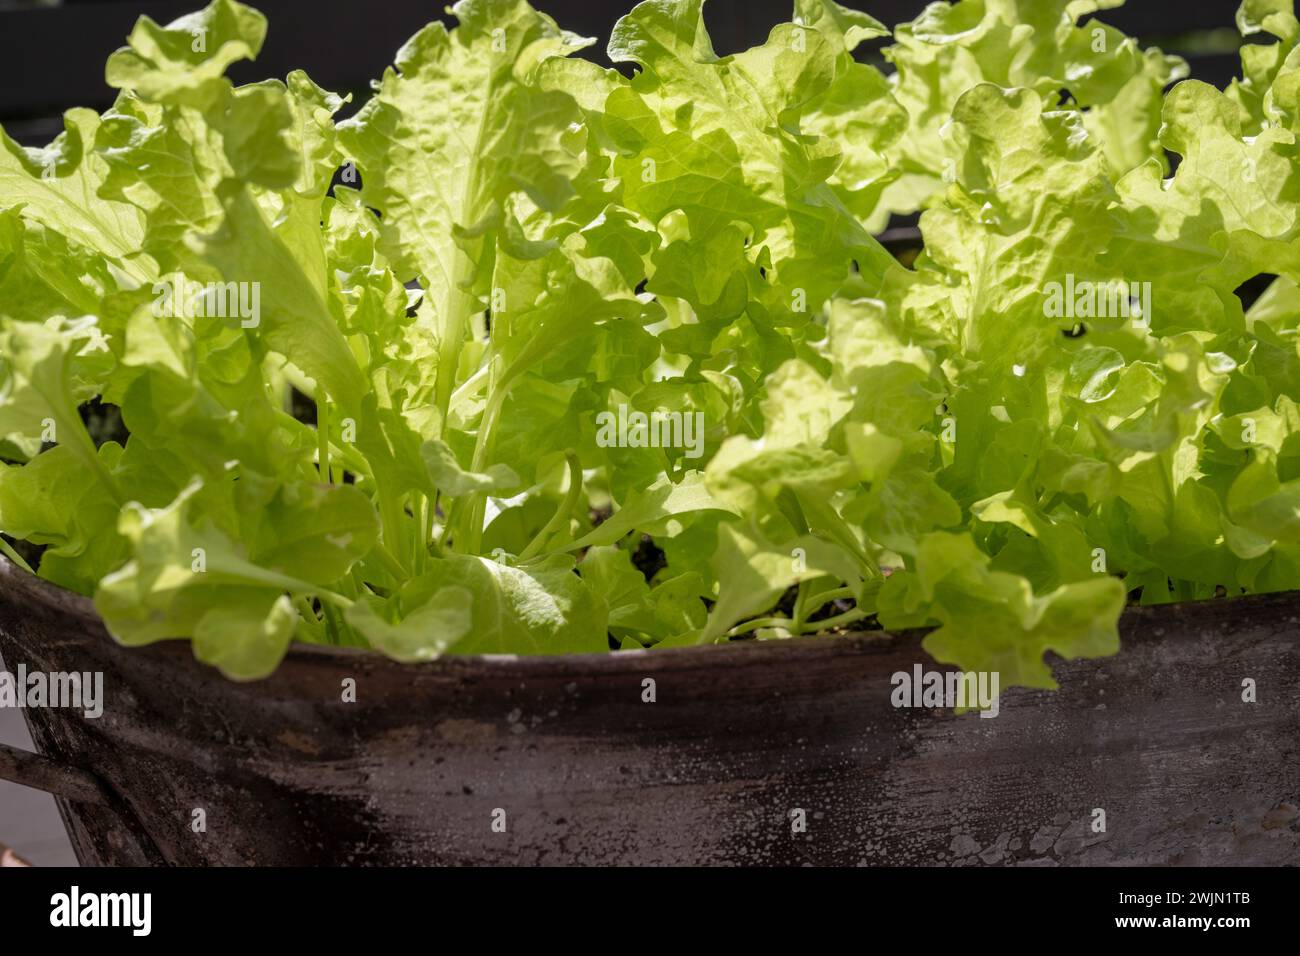 Lollo Bionda lettuce growing in a metal container Stock Photo